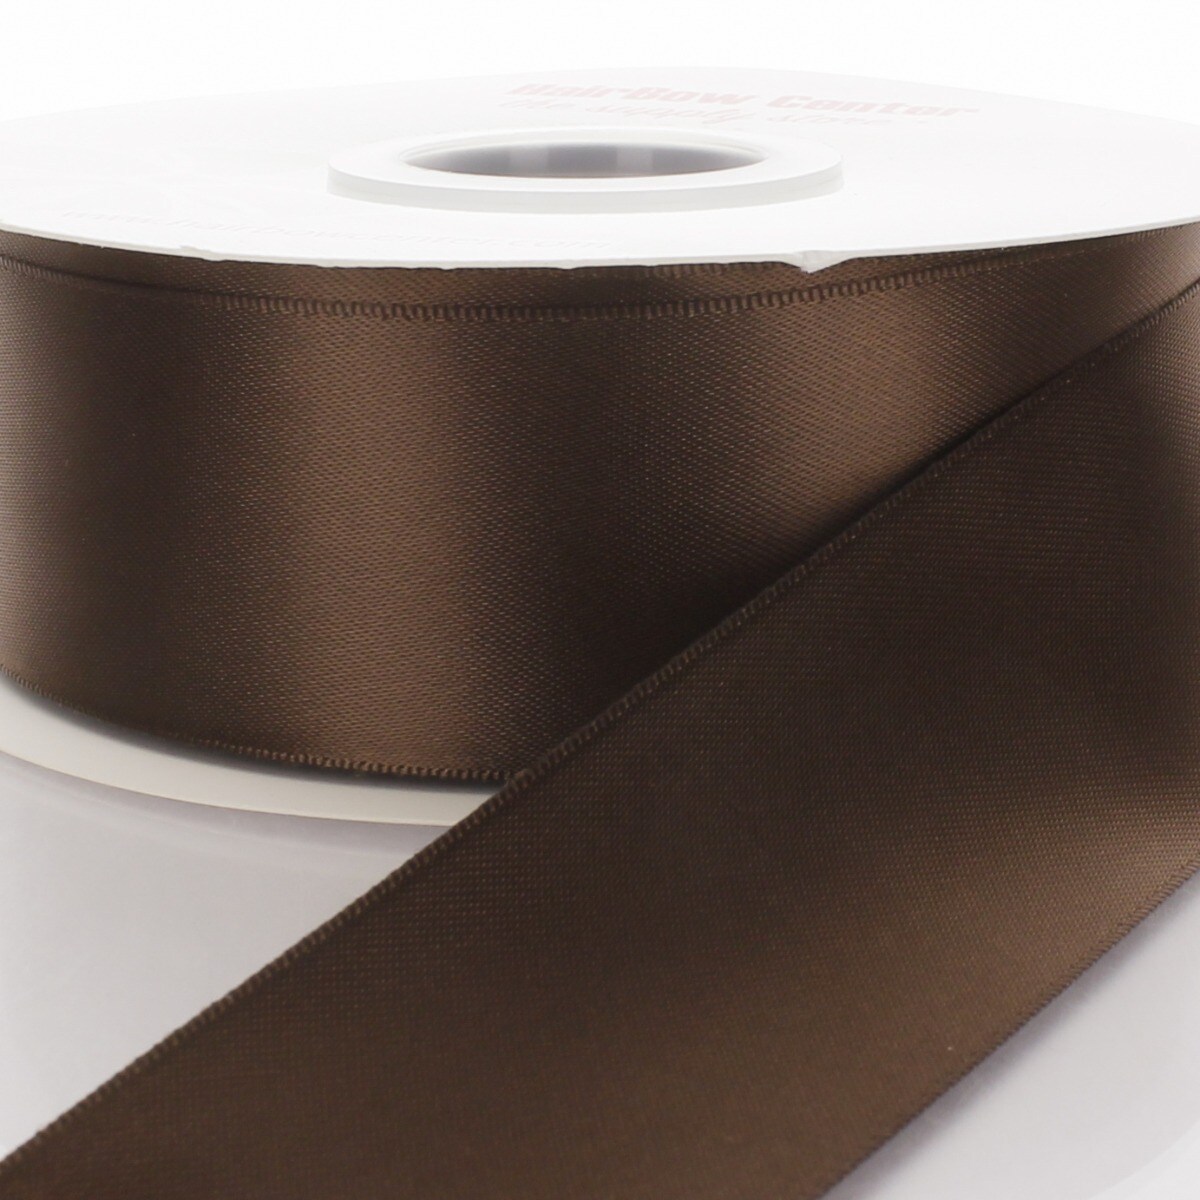 2.25 Double Faced Satin Ribbon 850 Brown 3yd